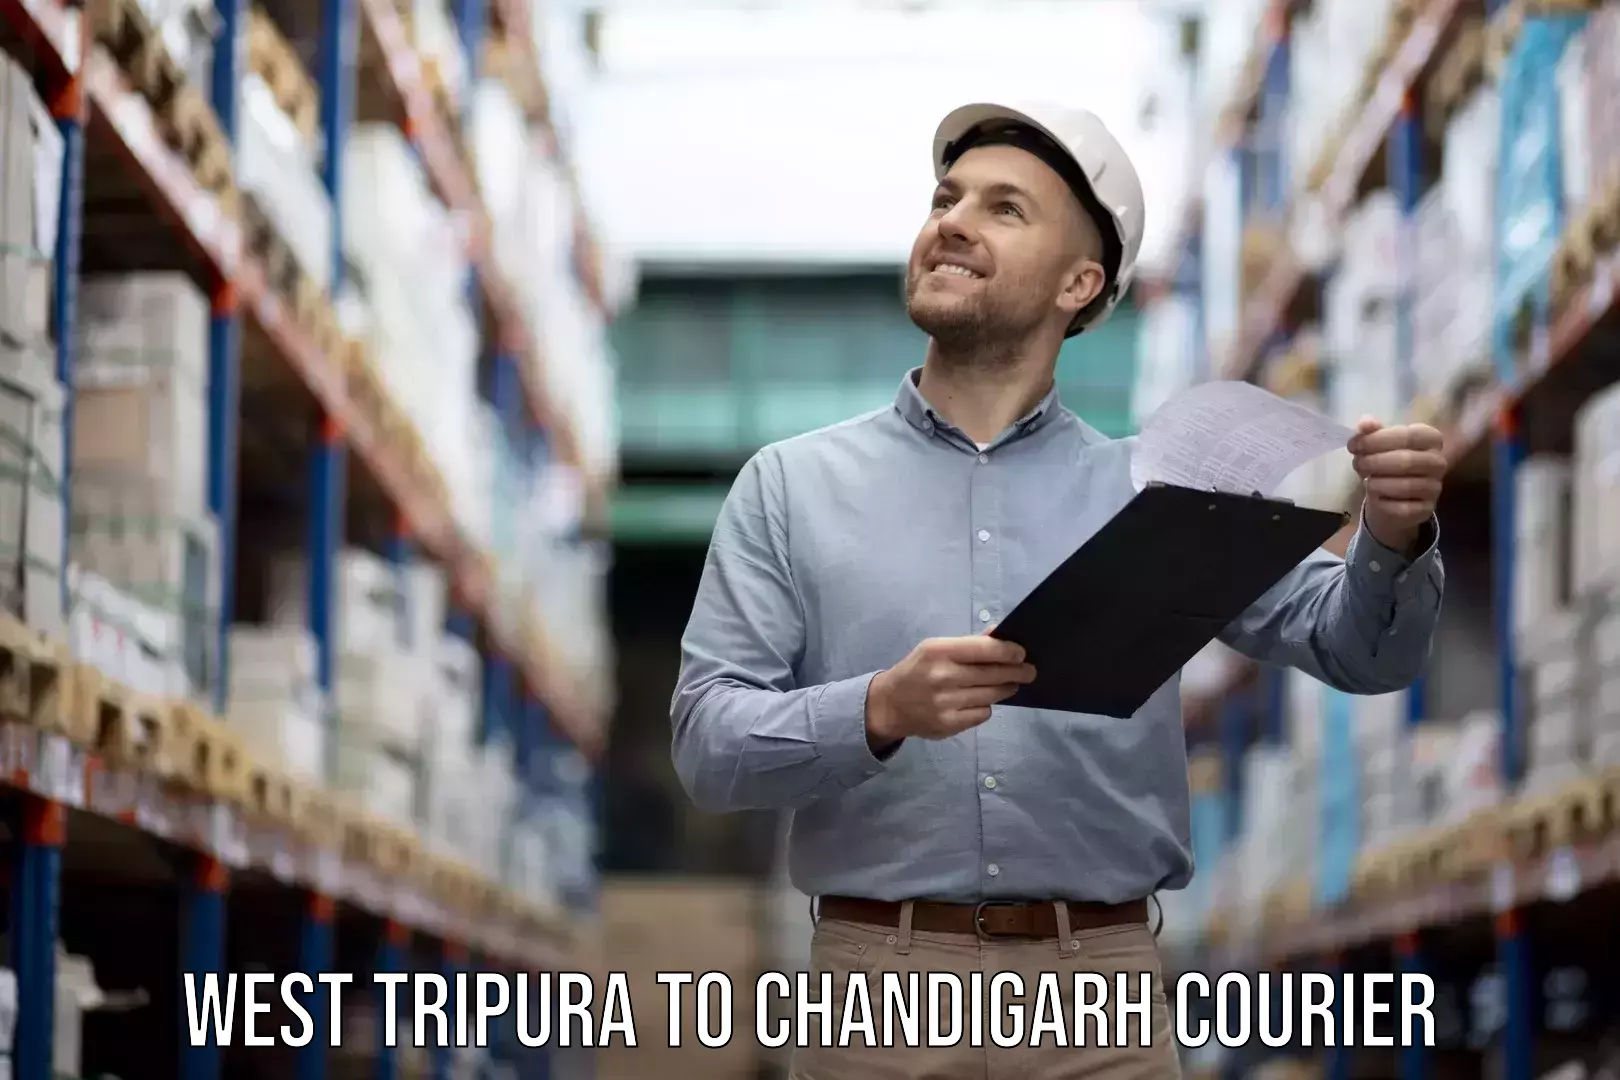 Home furniture relocation West Tripura to Chandigarh